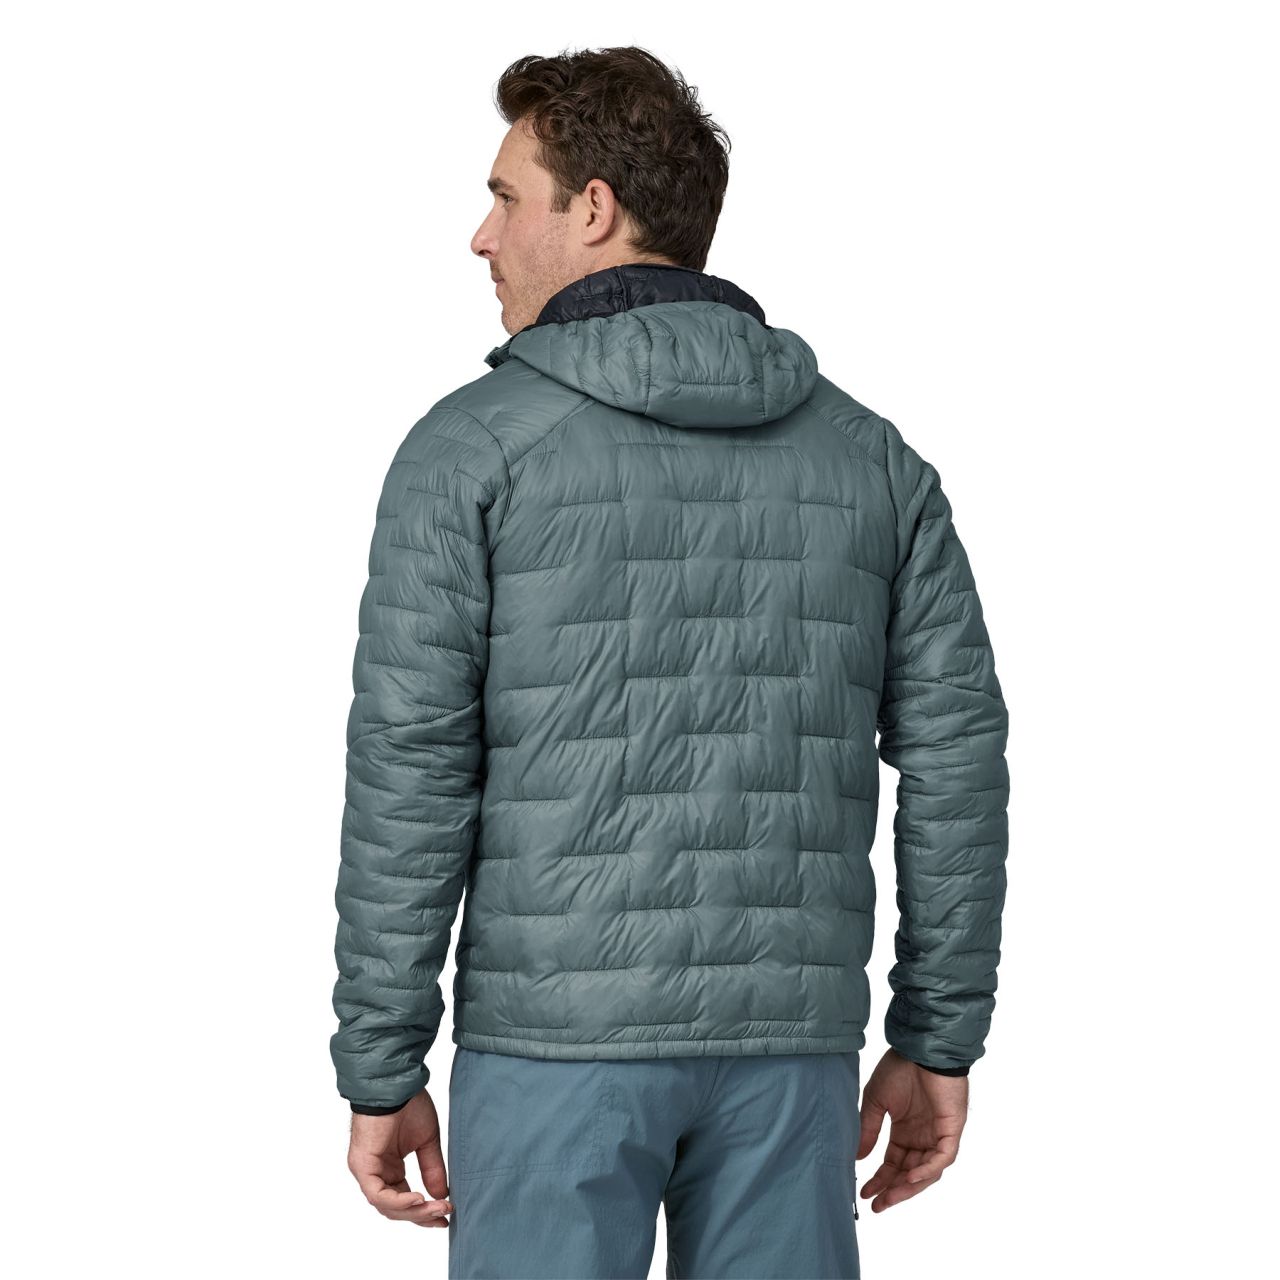 Save 40%: The Patagonia Micro Puff Jacket Is on Sale Now